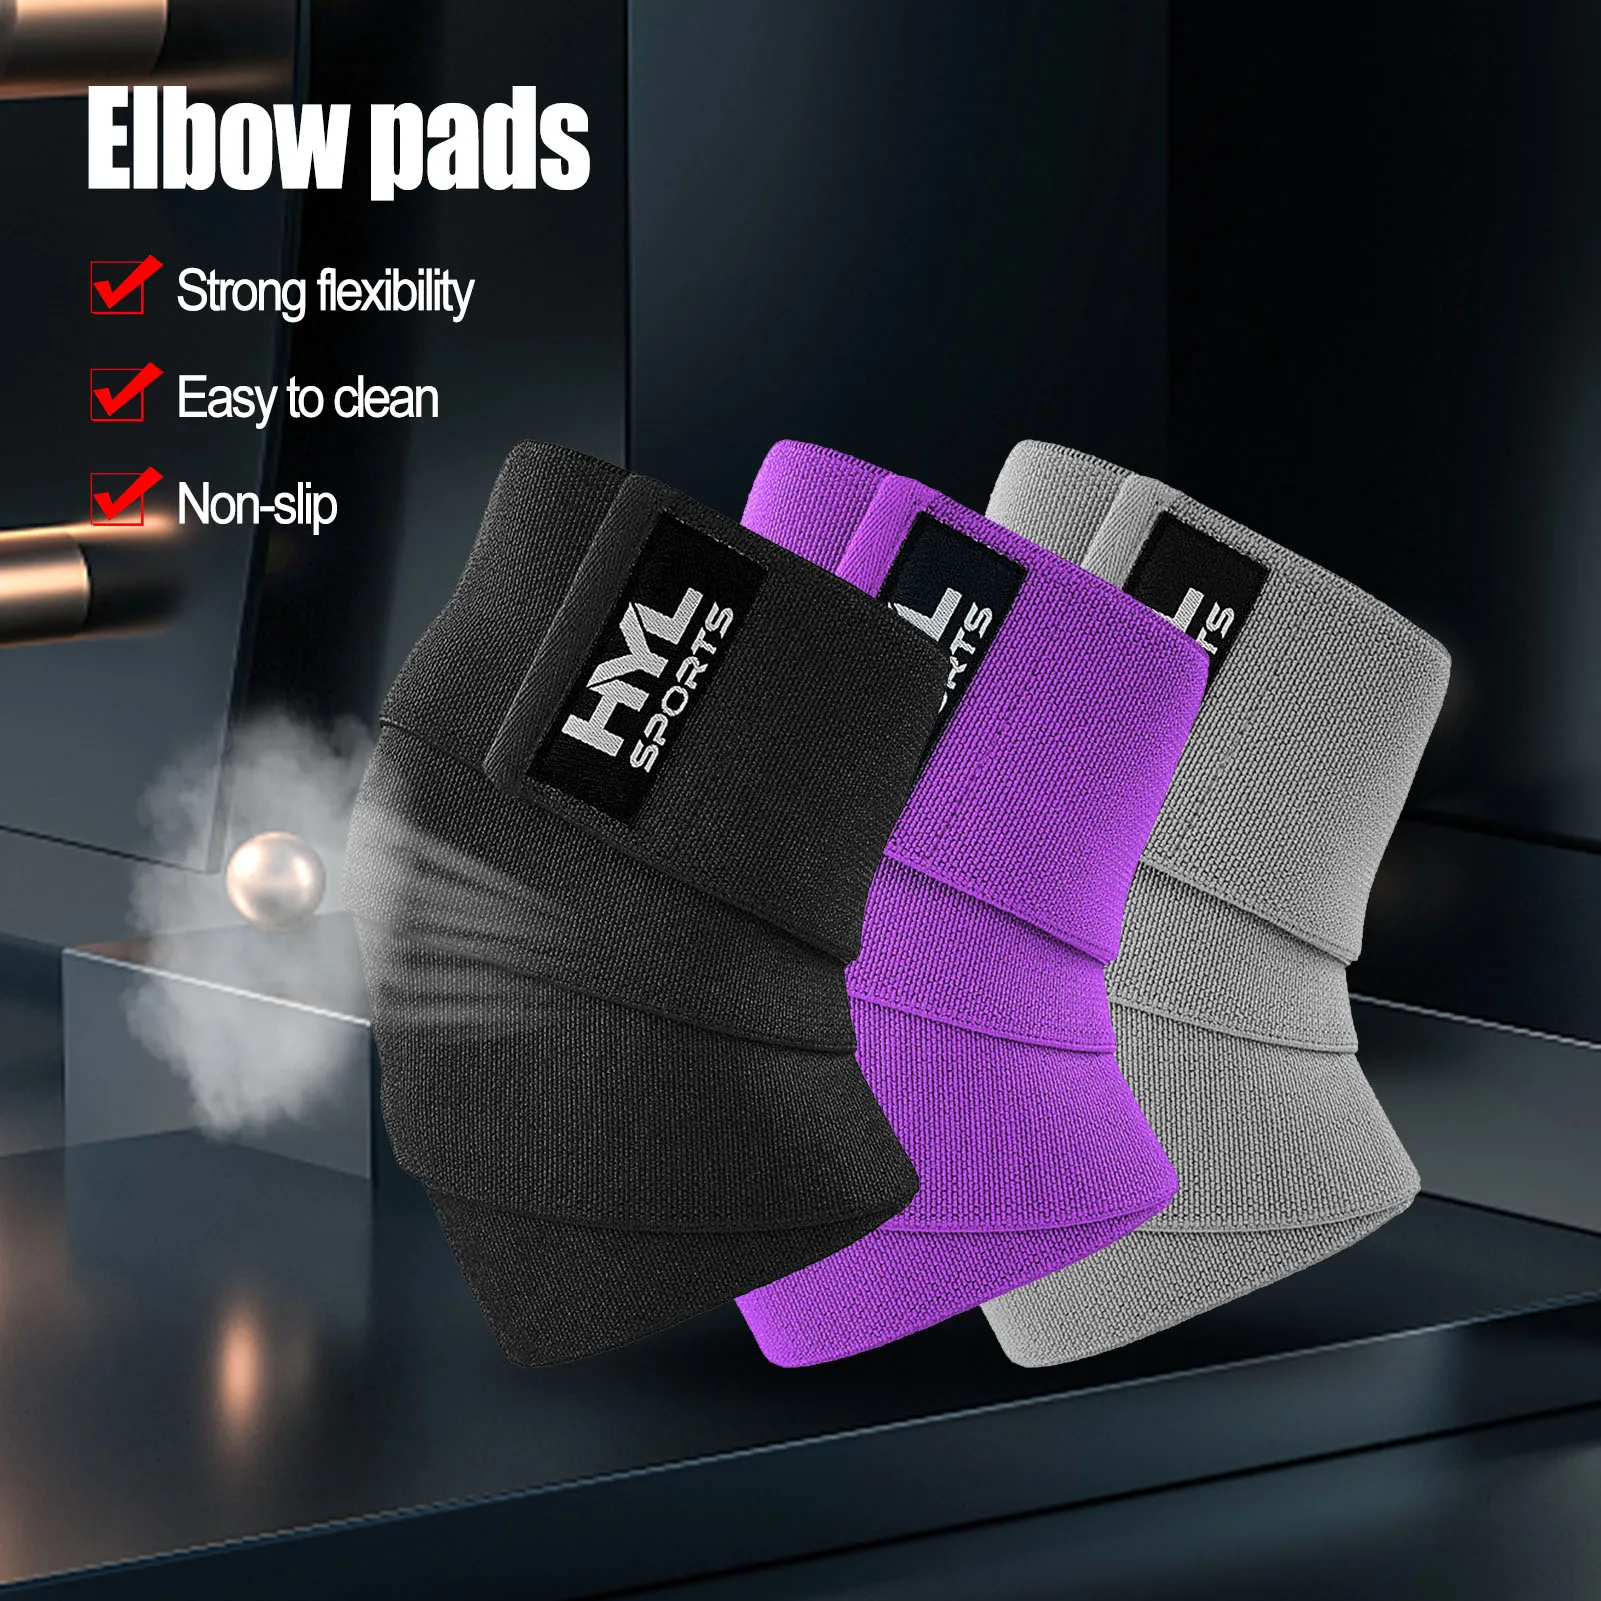 

Wrist Elbow Knee Wraps Elastic Straps Brace Support Protector For Weightlifting Workout Bodybuilding Gym Fitness Man Women